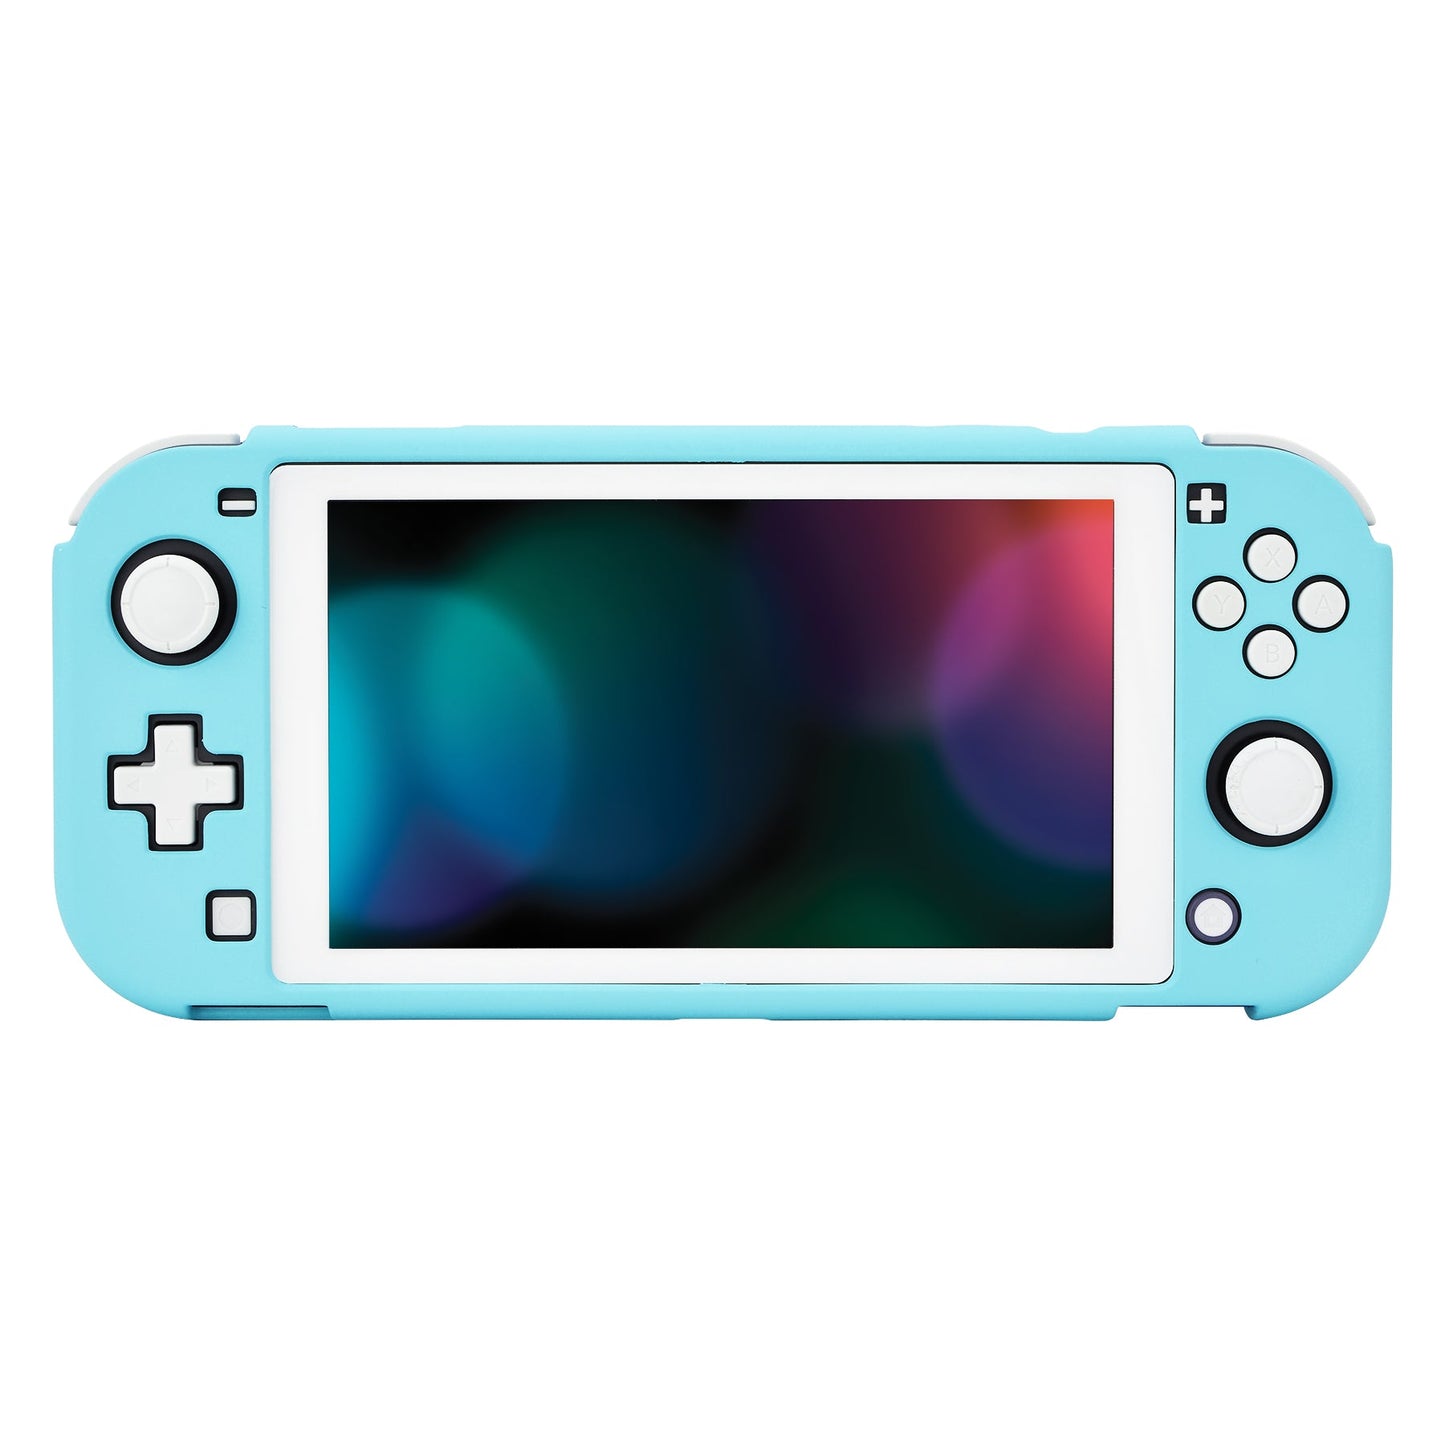 PlayVital Soft Touch Heaven Blue Customized Protective Grip Case for Nintendo Switch Lite, Hard Cover Protector for Nintendo Switch Lite - 1 x White Border Tempered Glass Screen Protector Included - LTP313 PlayVital